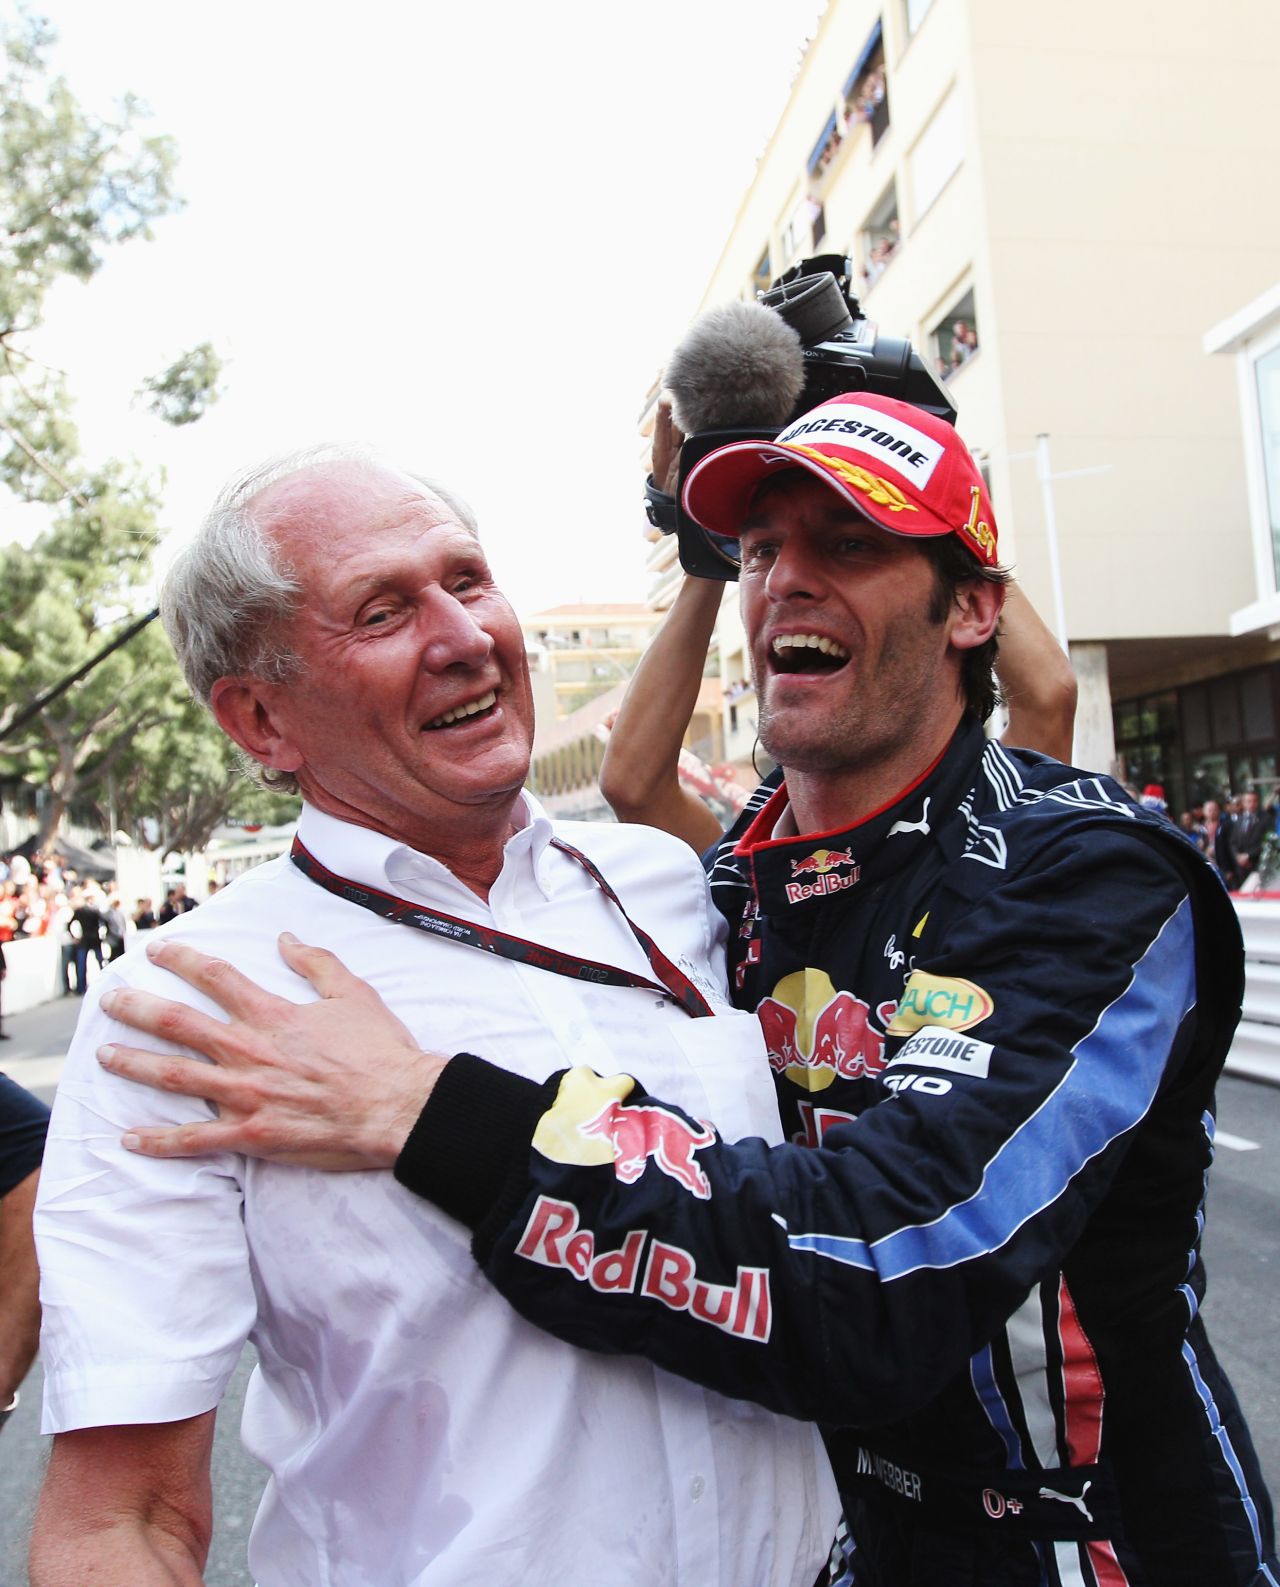 Vettel has long been nurtured by Helmut Marko, titled a motorsport consultant at Red Bull but the eyes, ears and mouth piece of team owner Dietrich Mateschitz, and a figure Webber has not always seen eye to eye with.